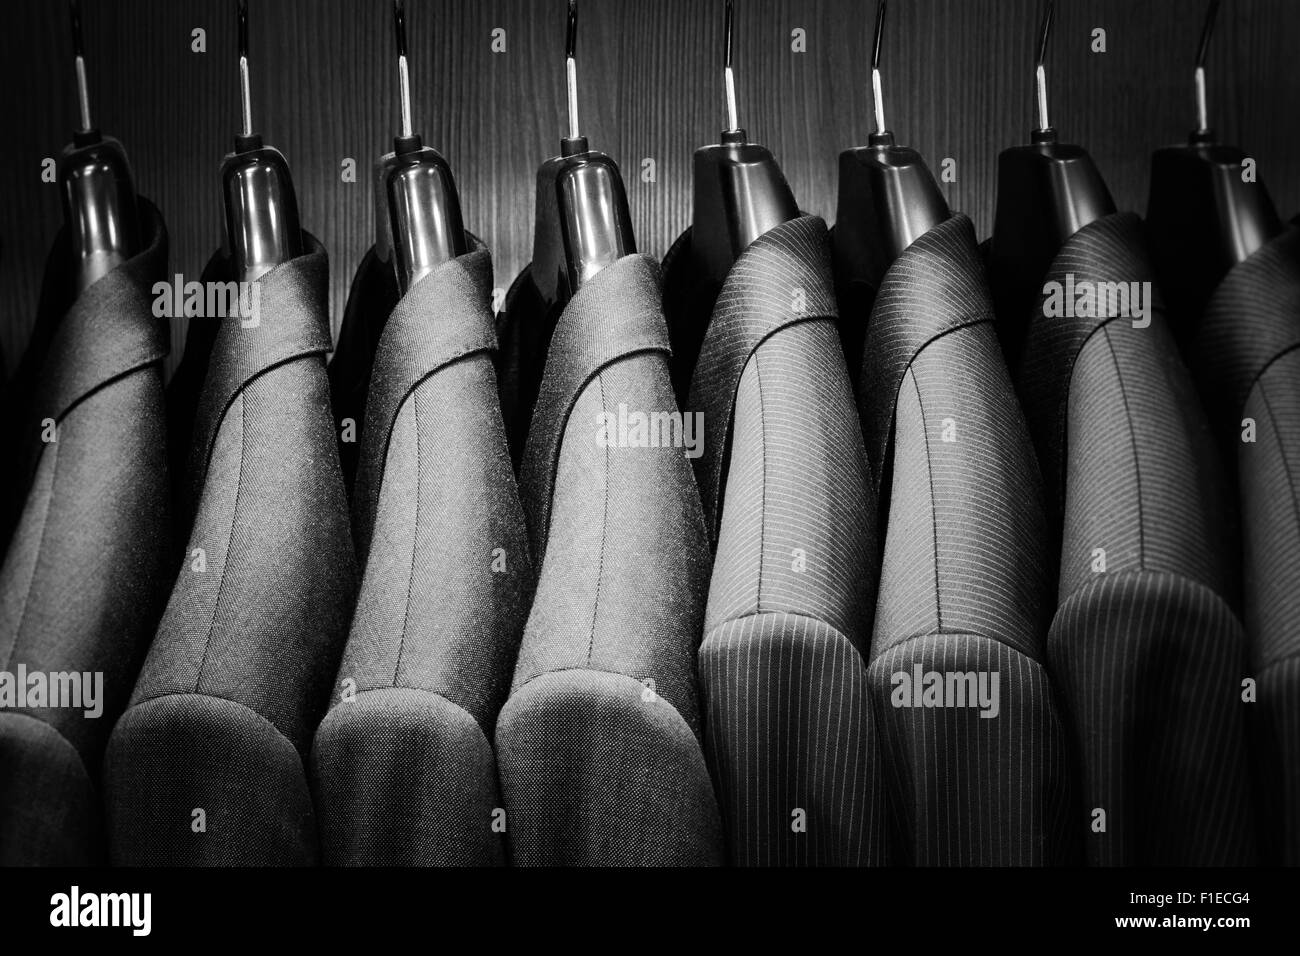 Row of men suit jackets. Black and white image. Stock Photo